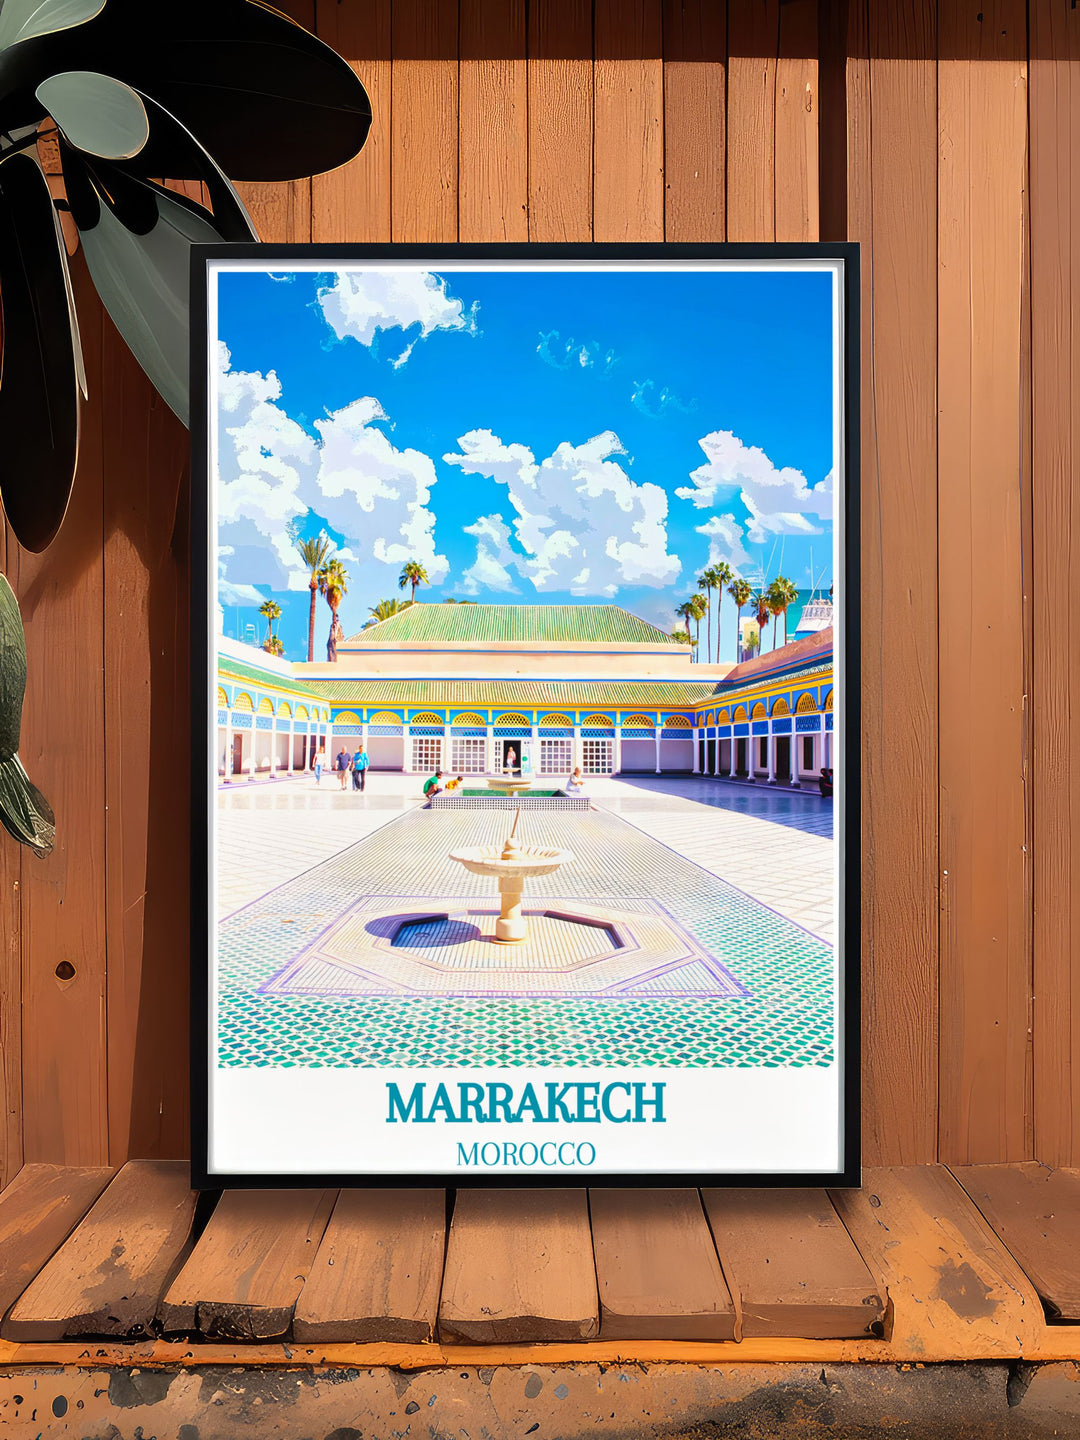 This travel poster beautifully depicts the historic allure of Marrakech and the architectural splendor of Bahia Palace, ideal for adding a touch of Moroccos cultural heritage to any room.